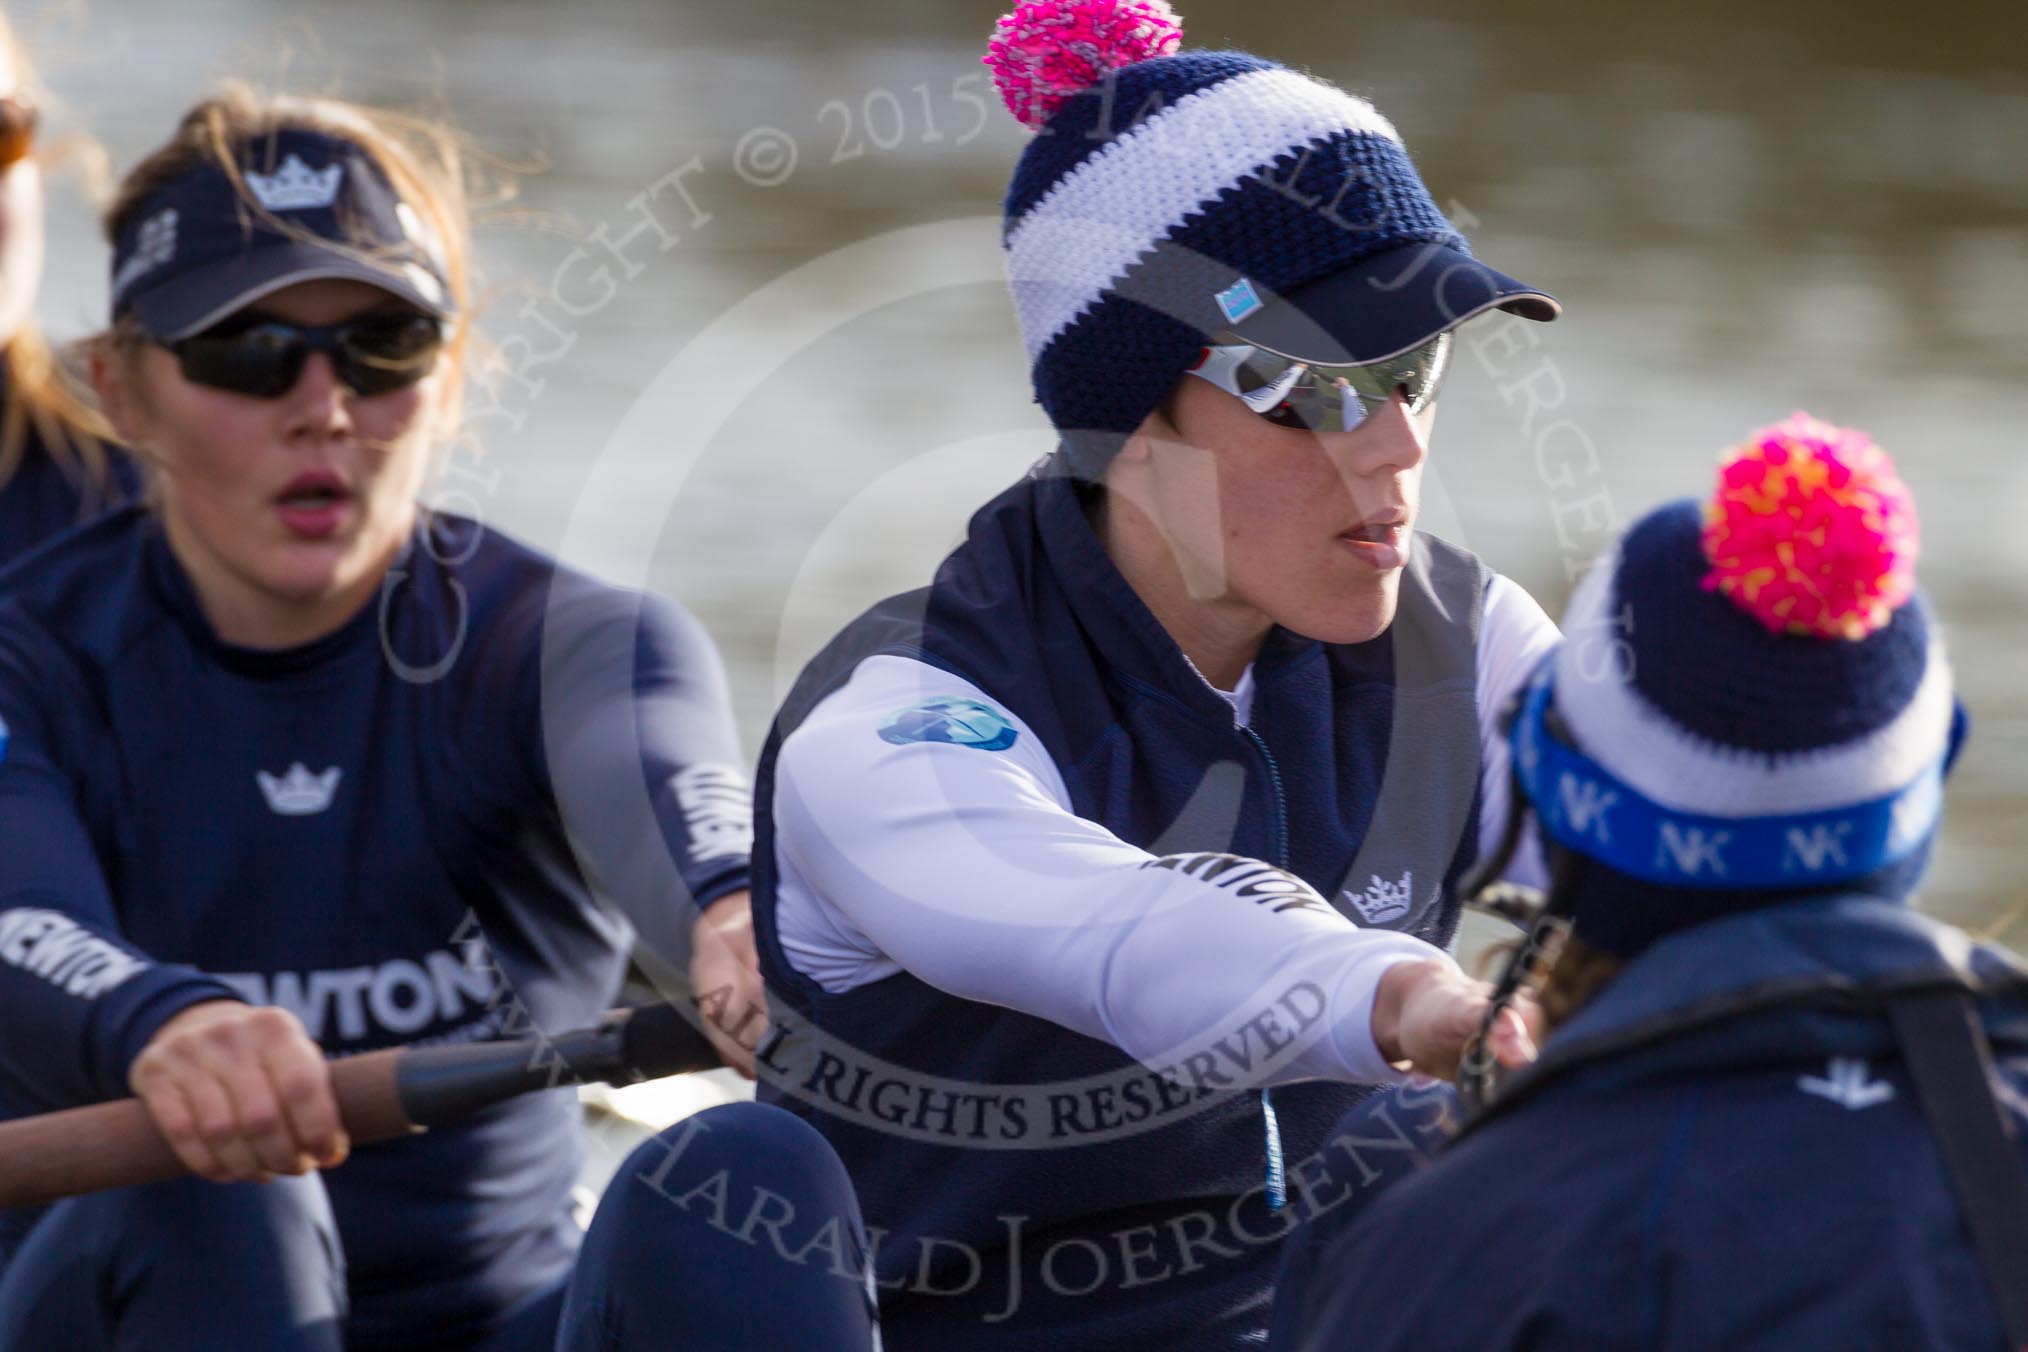 The Boat Race season 2015: OUWBC training Wallingford.

Wallingford,

United Kingdom,
on 04 March 2015 at 15:42, image #45